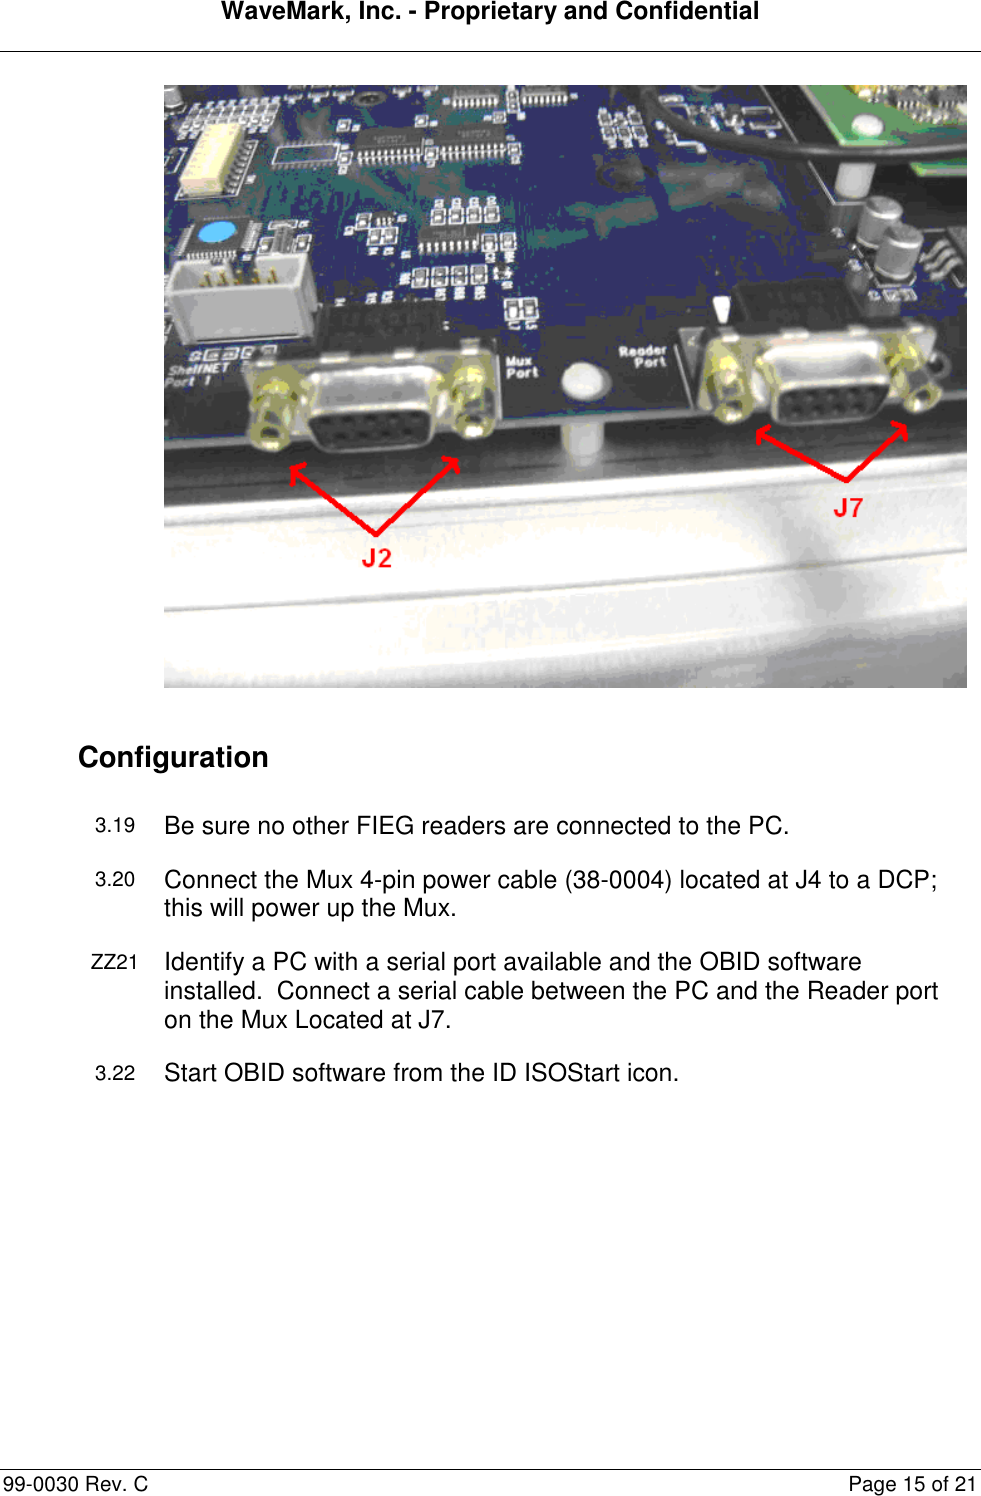 WaveMark, Inc. - Proprietary and Confidential  99-0030 Rev. C  Page 15 of 21  Configuration 3.19 Be sure no other FIEG readers are connected to the PC. 3.20 Connect the Mux 4-pin power cable (38-0004) located at J4 to a DCP; this will power up the Mux. ZZ21 Identify a PC with a serial port available and the OBID software installed.  Connect a serial cable between the PC and the Reader port on the Mux Located at J7. 3.22 Start OBID software from the ID ISOStart icon. 